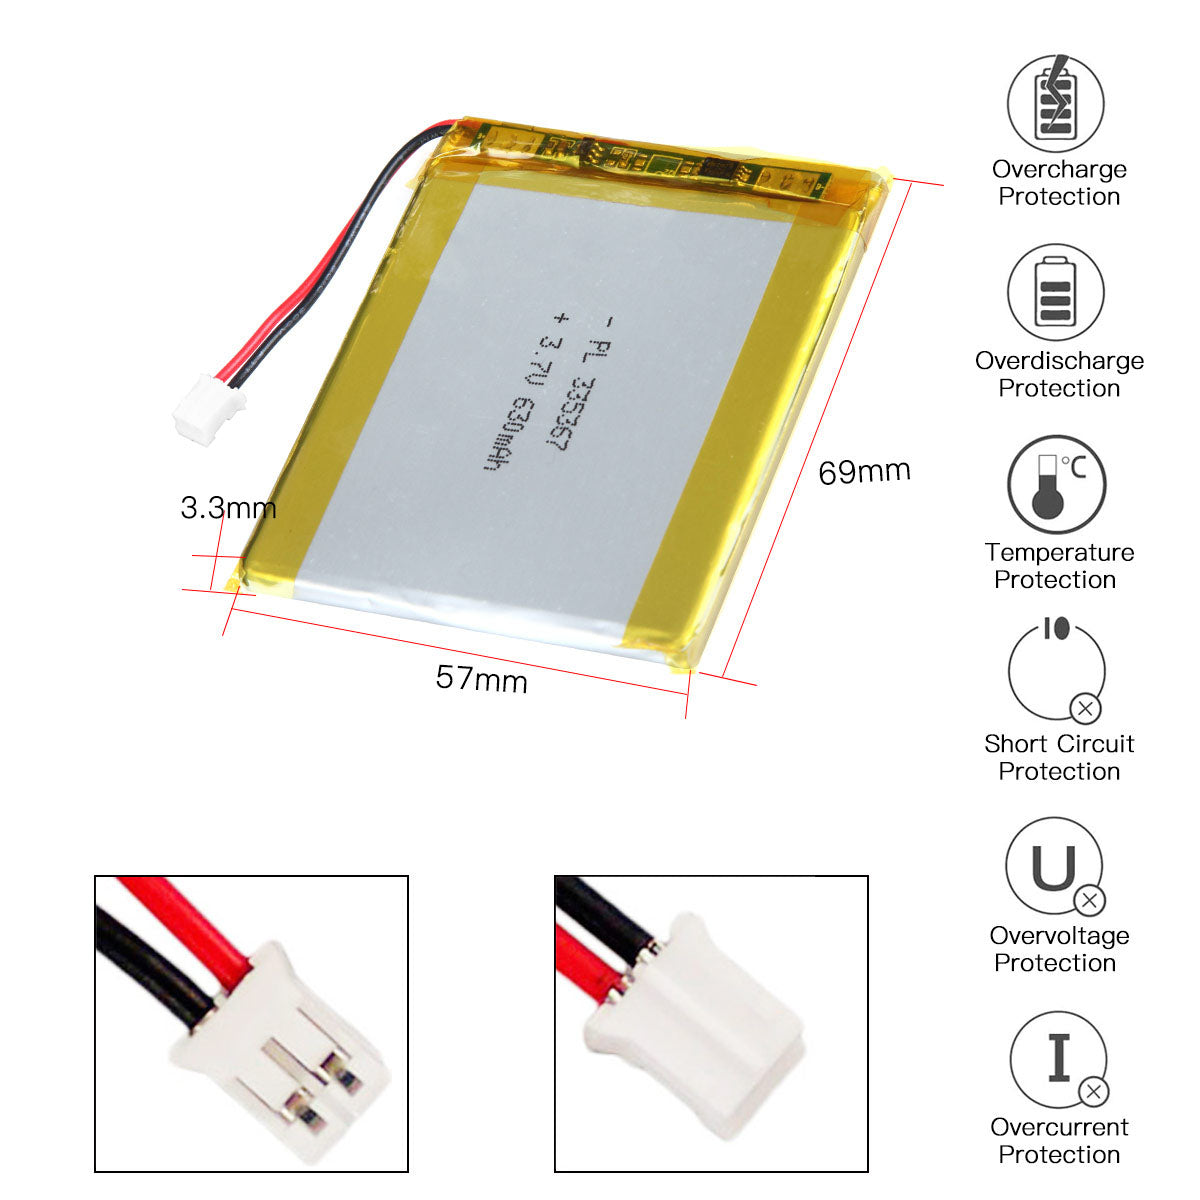 YDL 3.7V 630mAh 335367 Rechargeable Lithium Polymer Battery Length 69mm